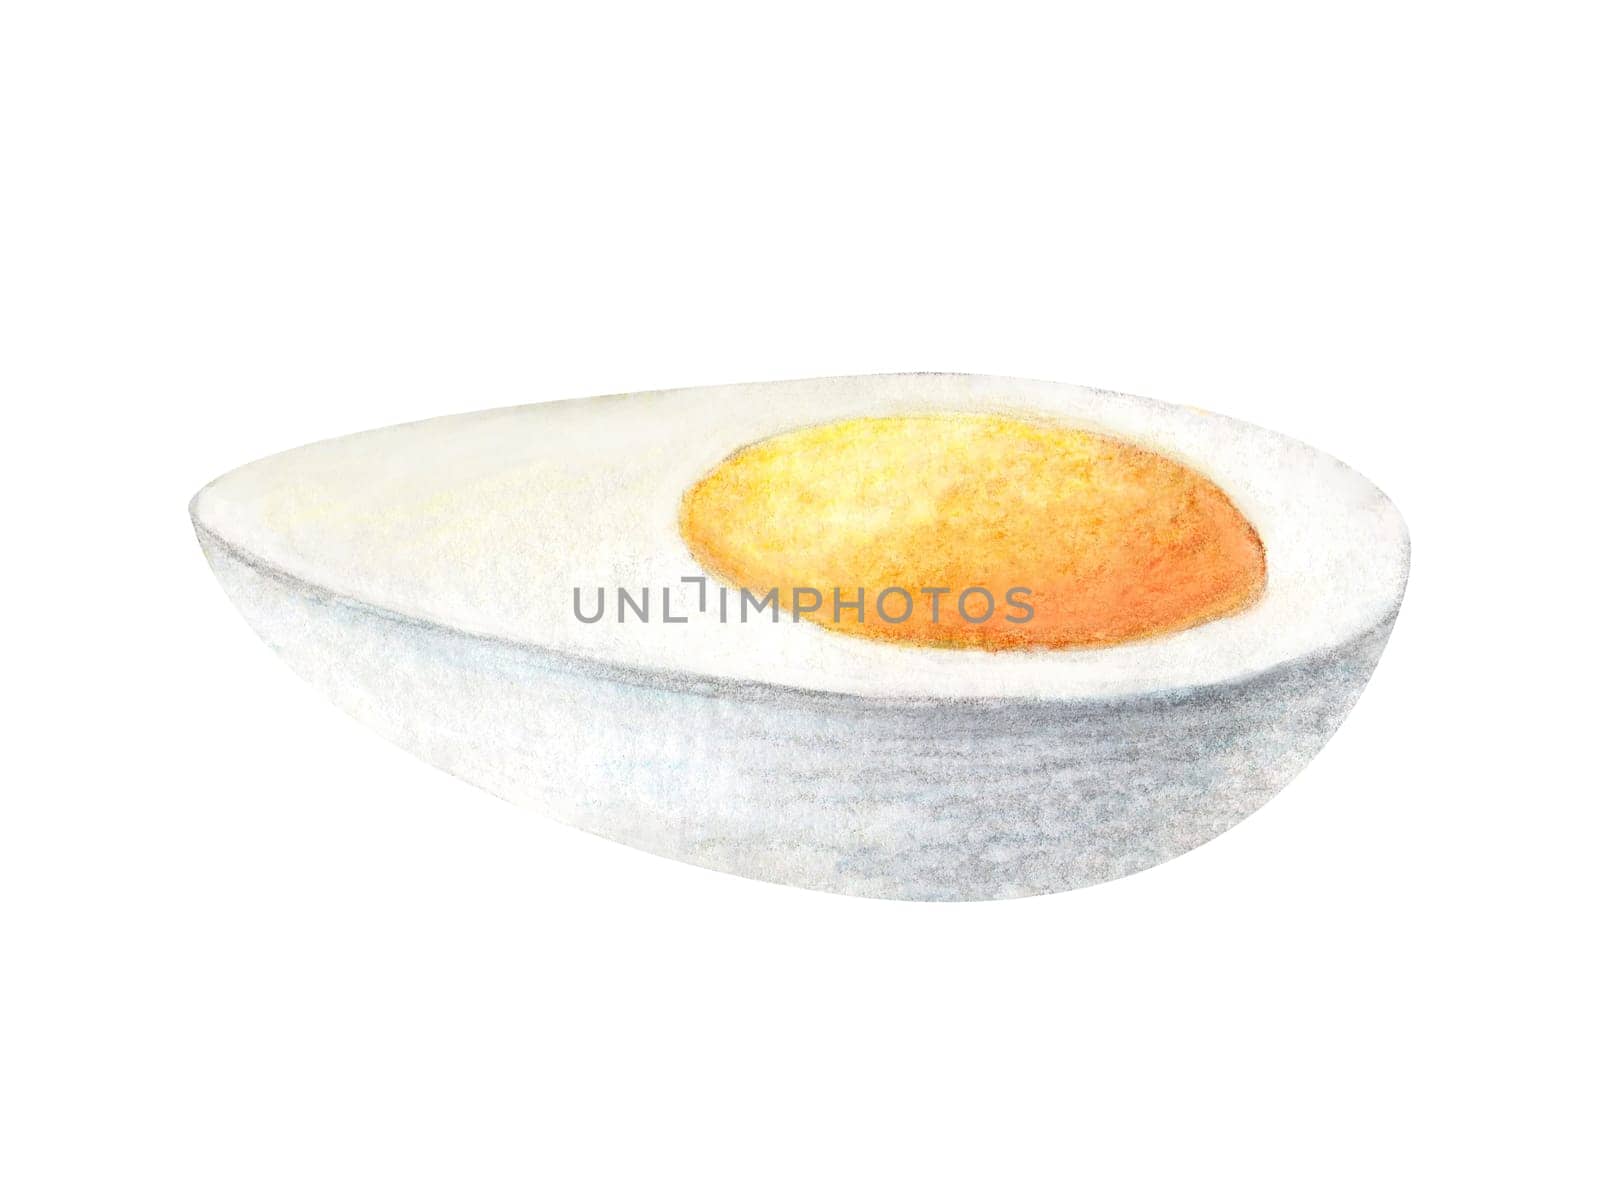 Watercolor painting of boiled scrambled egg illustration isolated on white background. Half of egg omelette for breakfast. Hand drawn ingredients for restaurant menu, receipt, label, brunch.